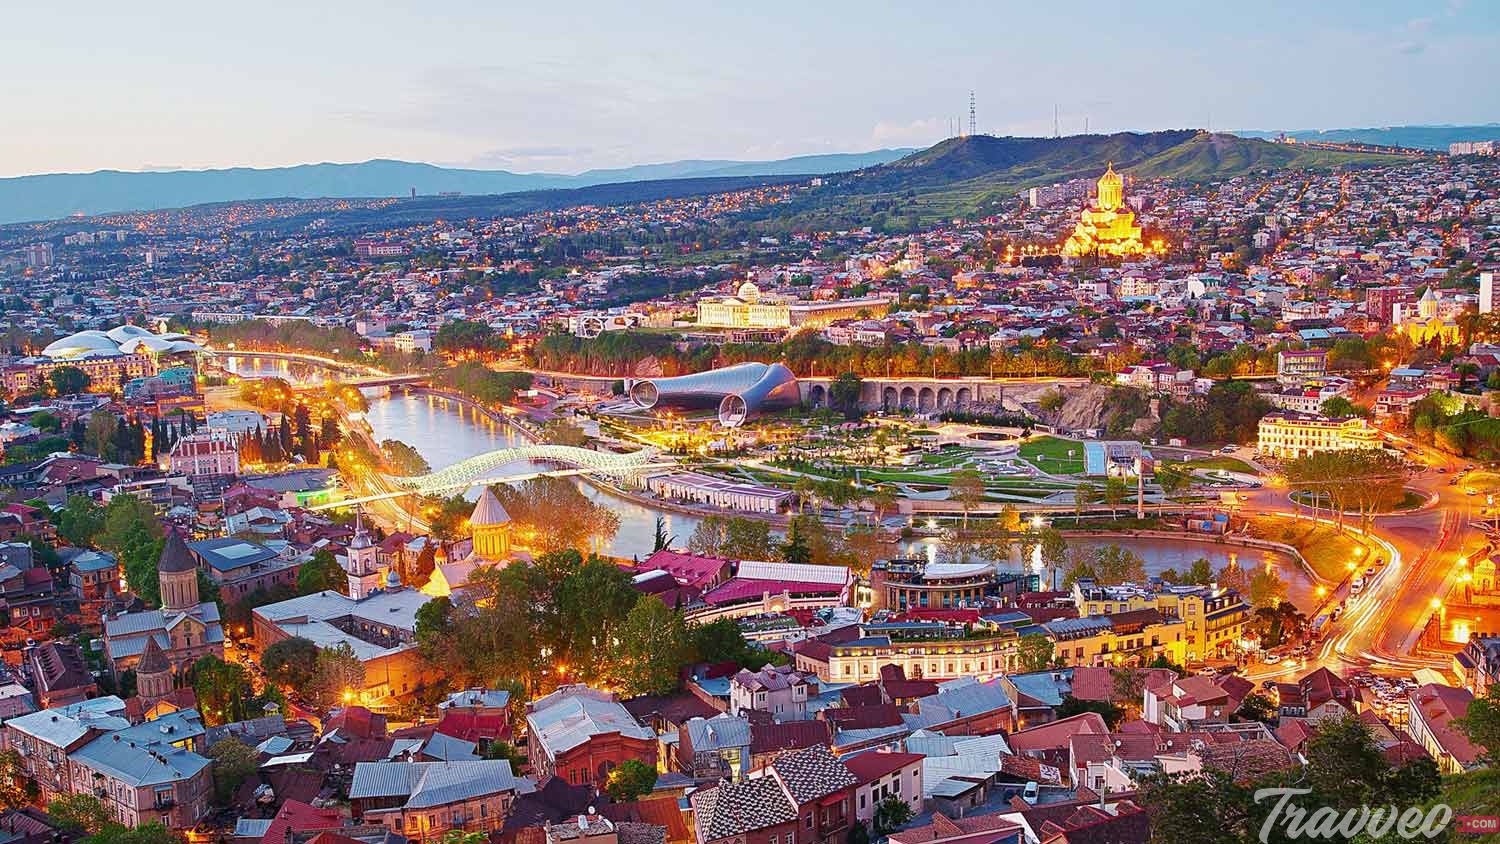 The Best Attractions in Tbilisi